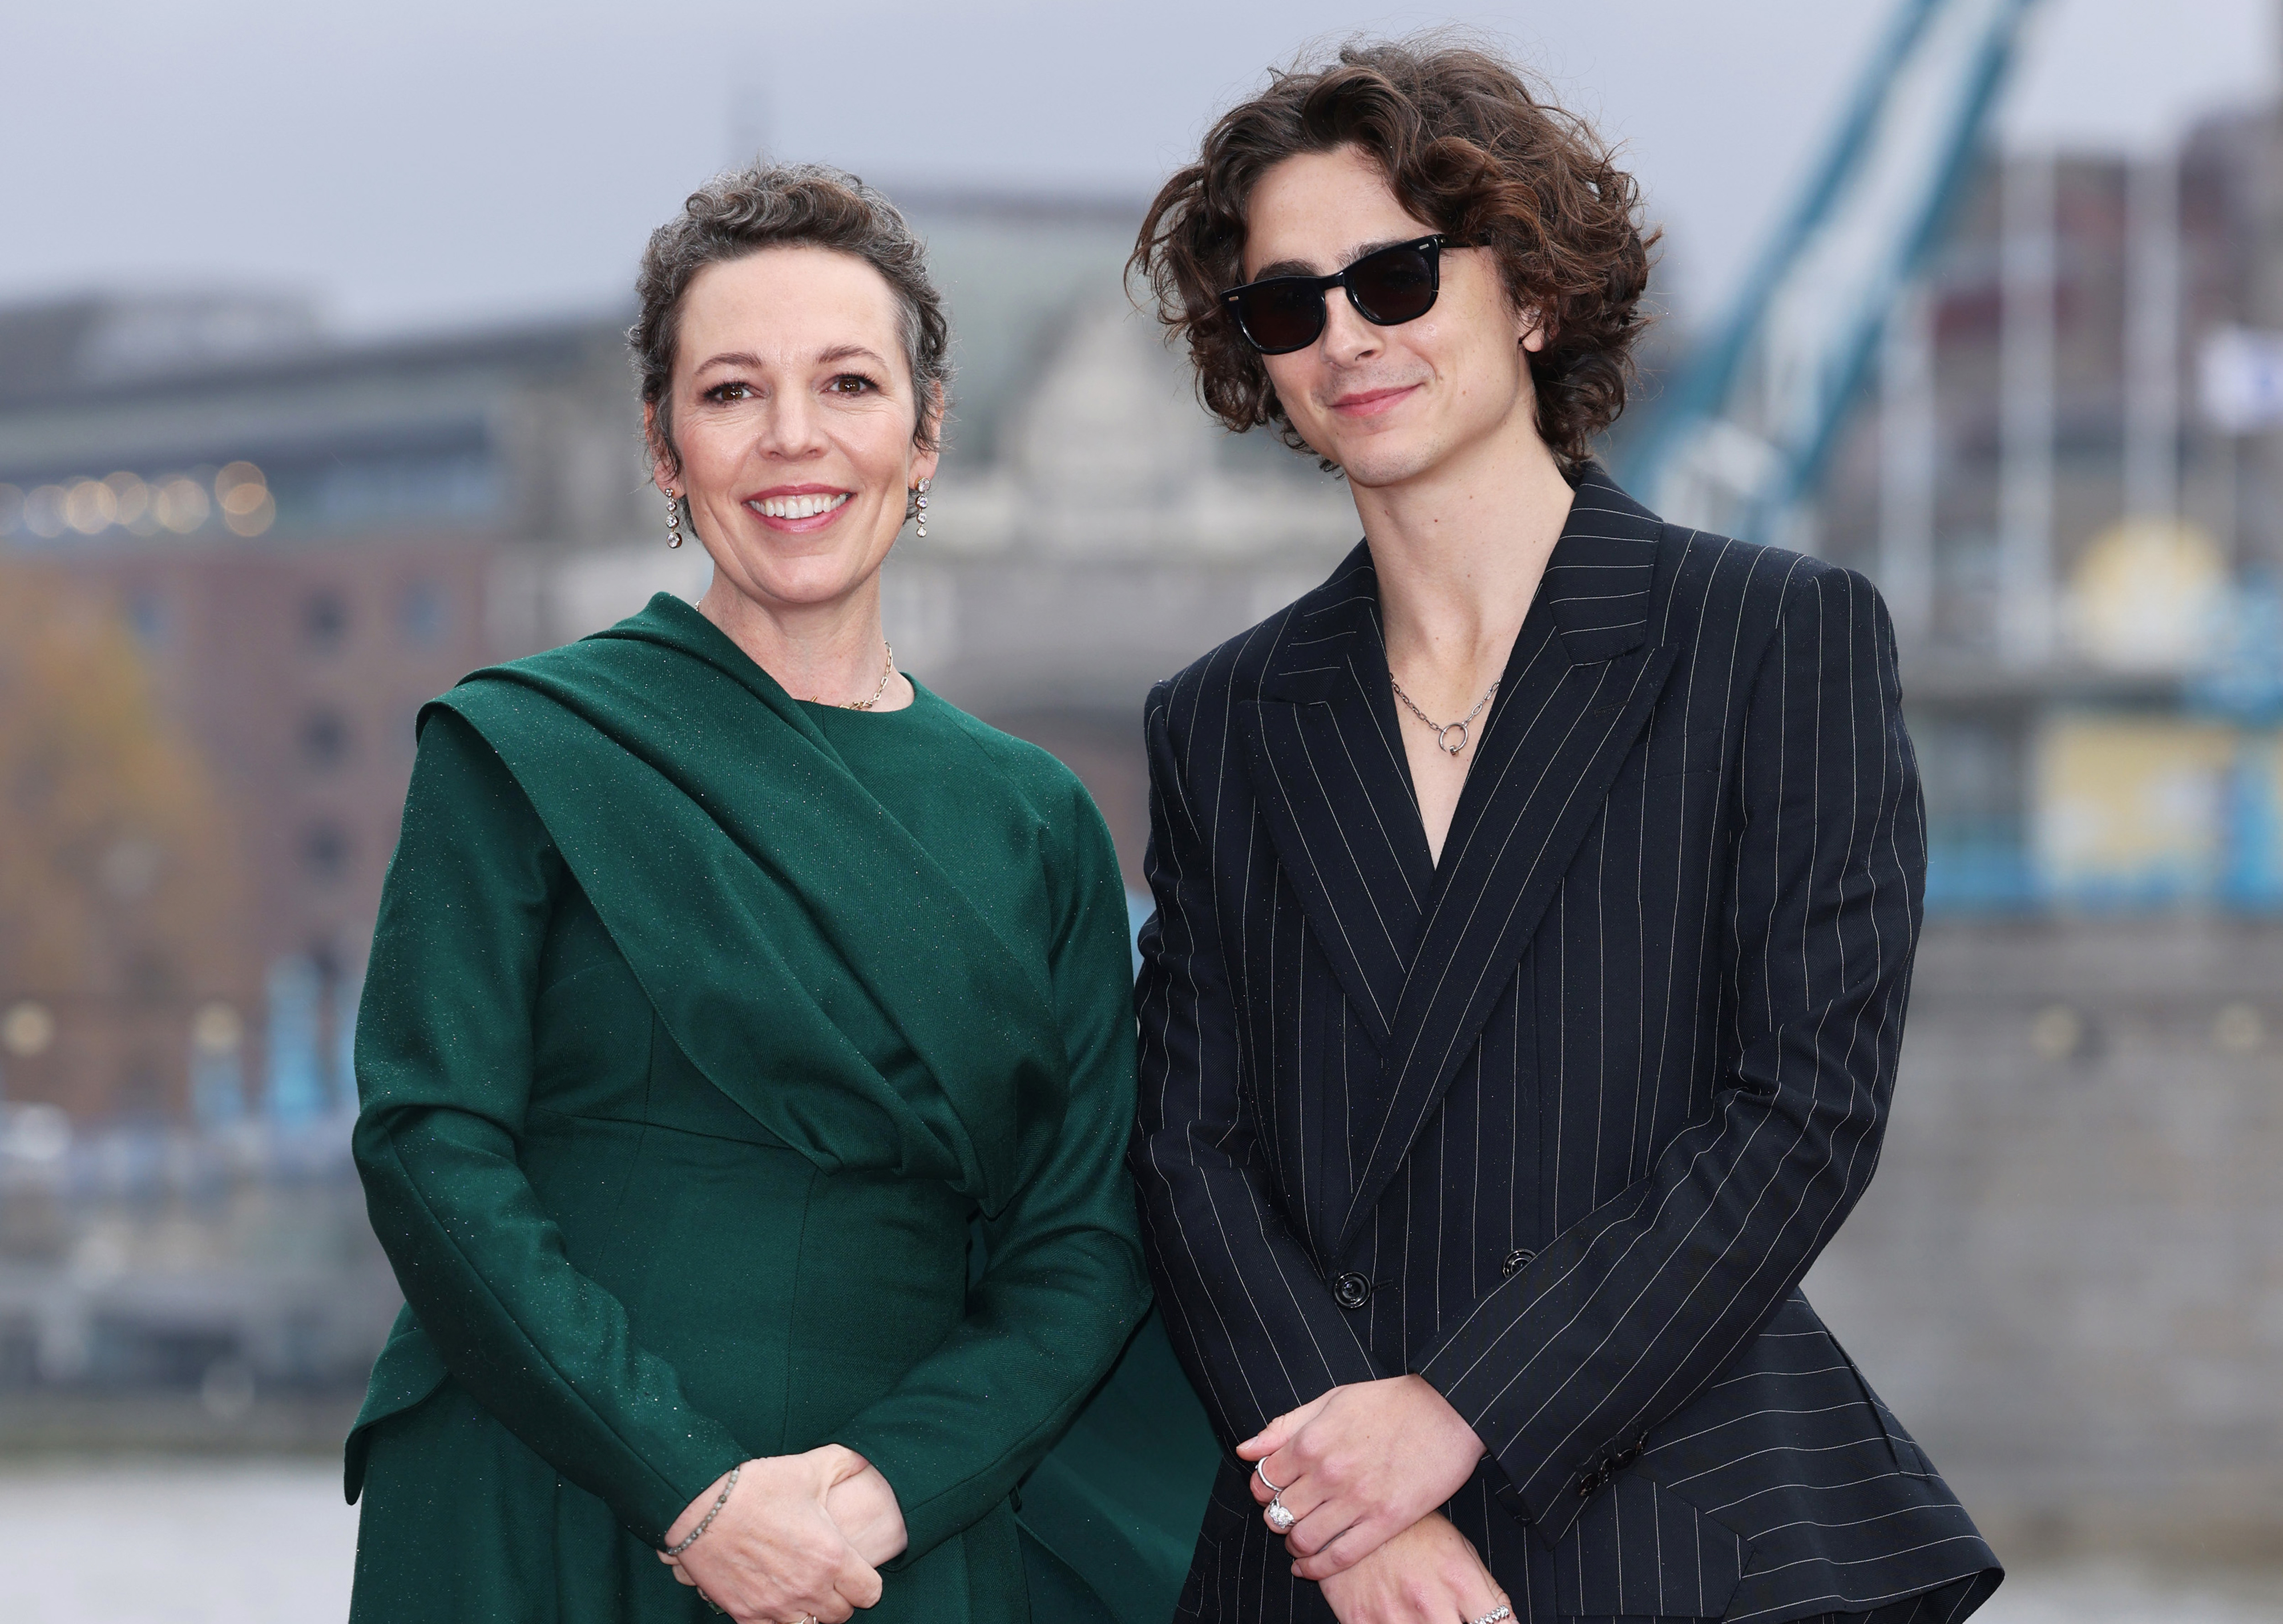 Olivia smiling in a long-sleeved dress with draped detail stands next to Timothée Chalamet, in a pin-striped suit, also smiling